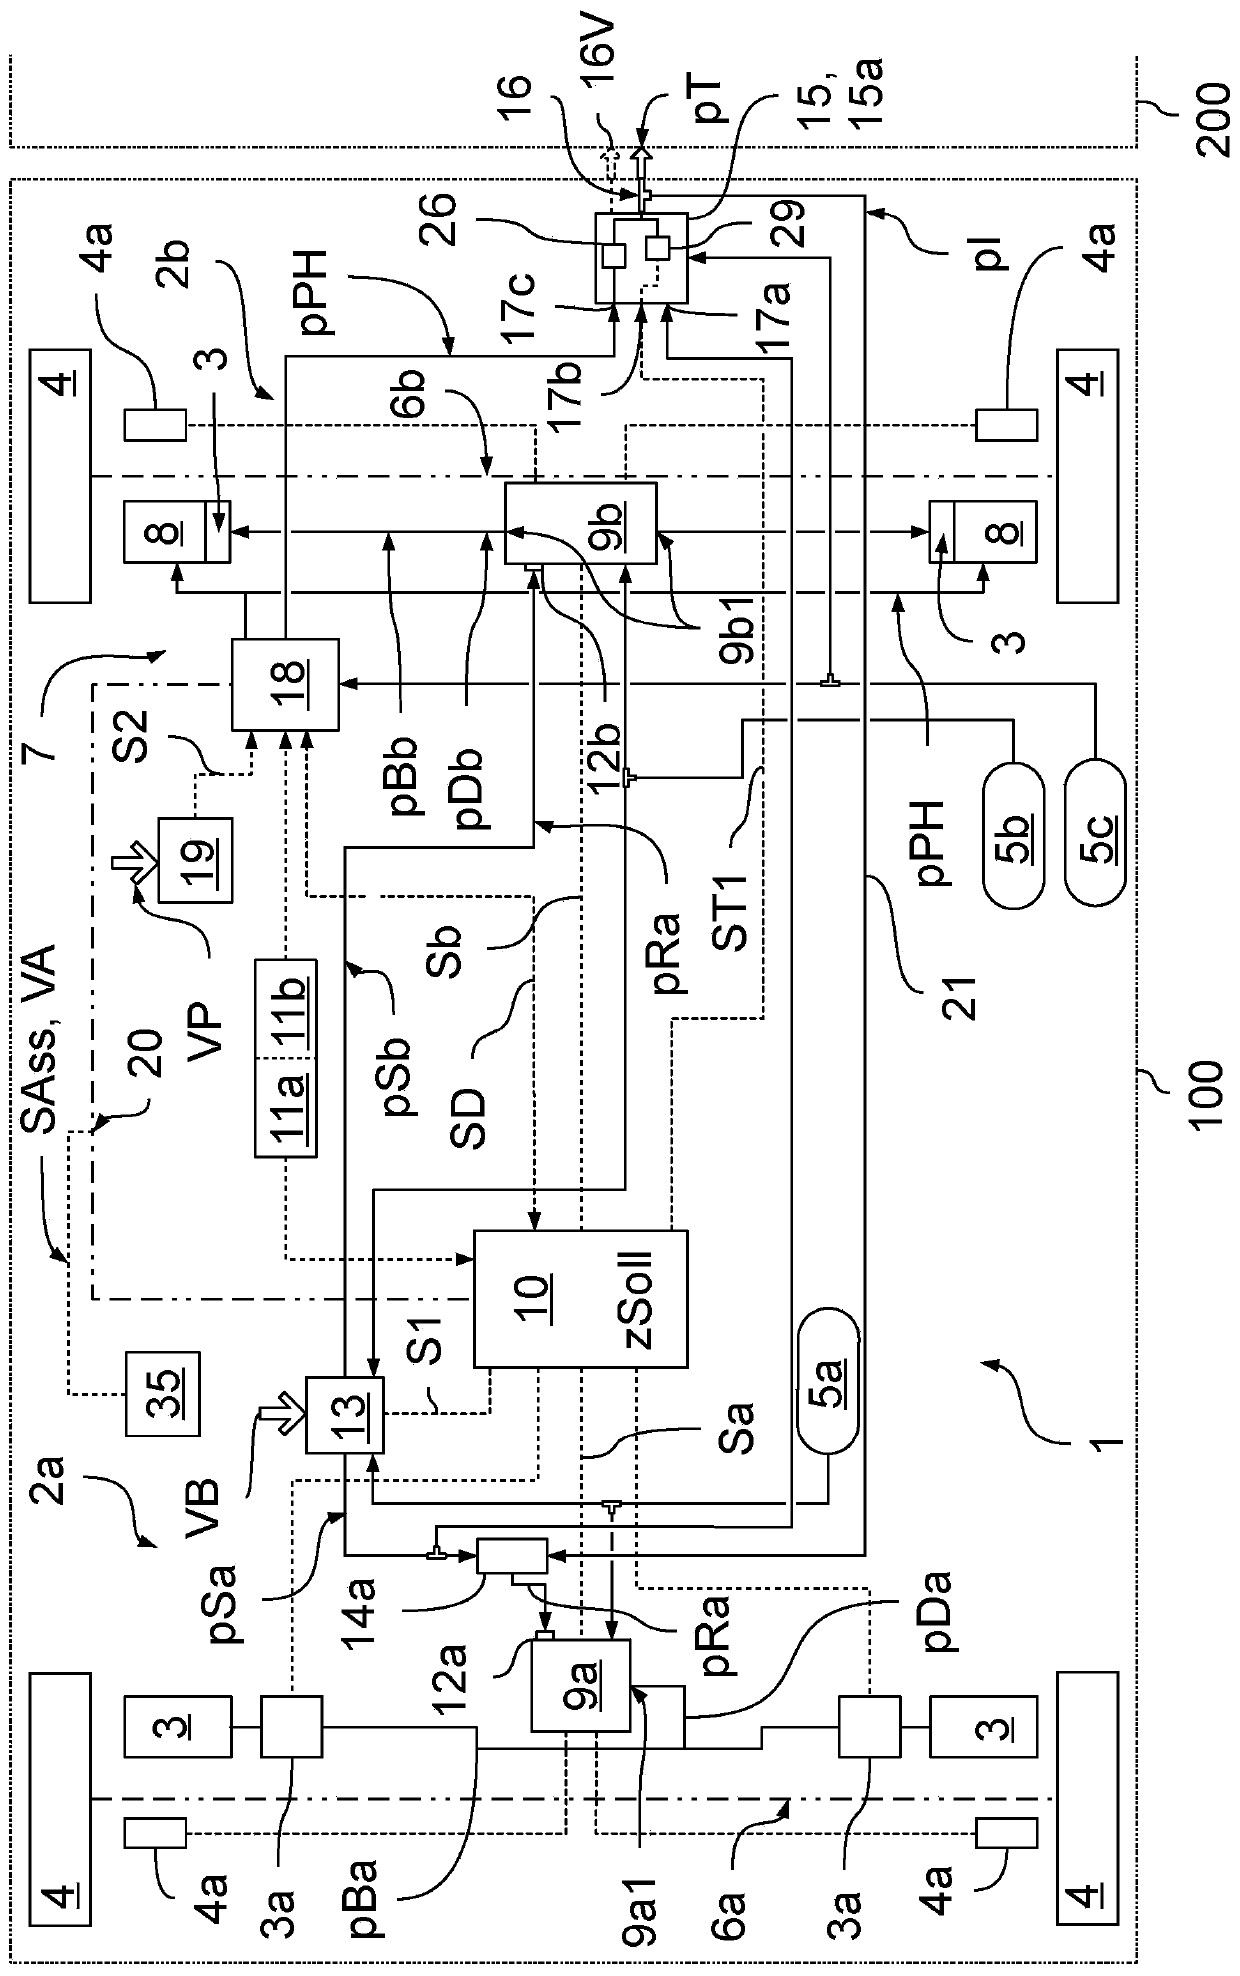 Electronically controllable brake system and method for controlling said electronically controllable brake system